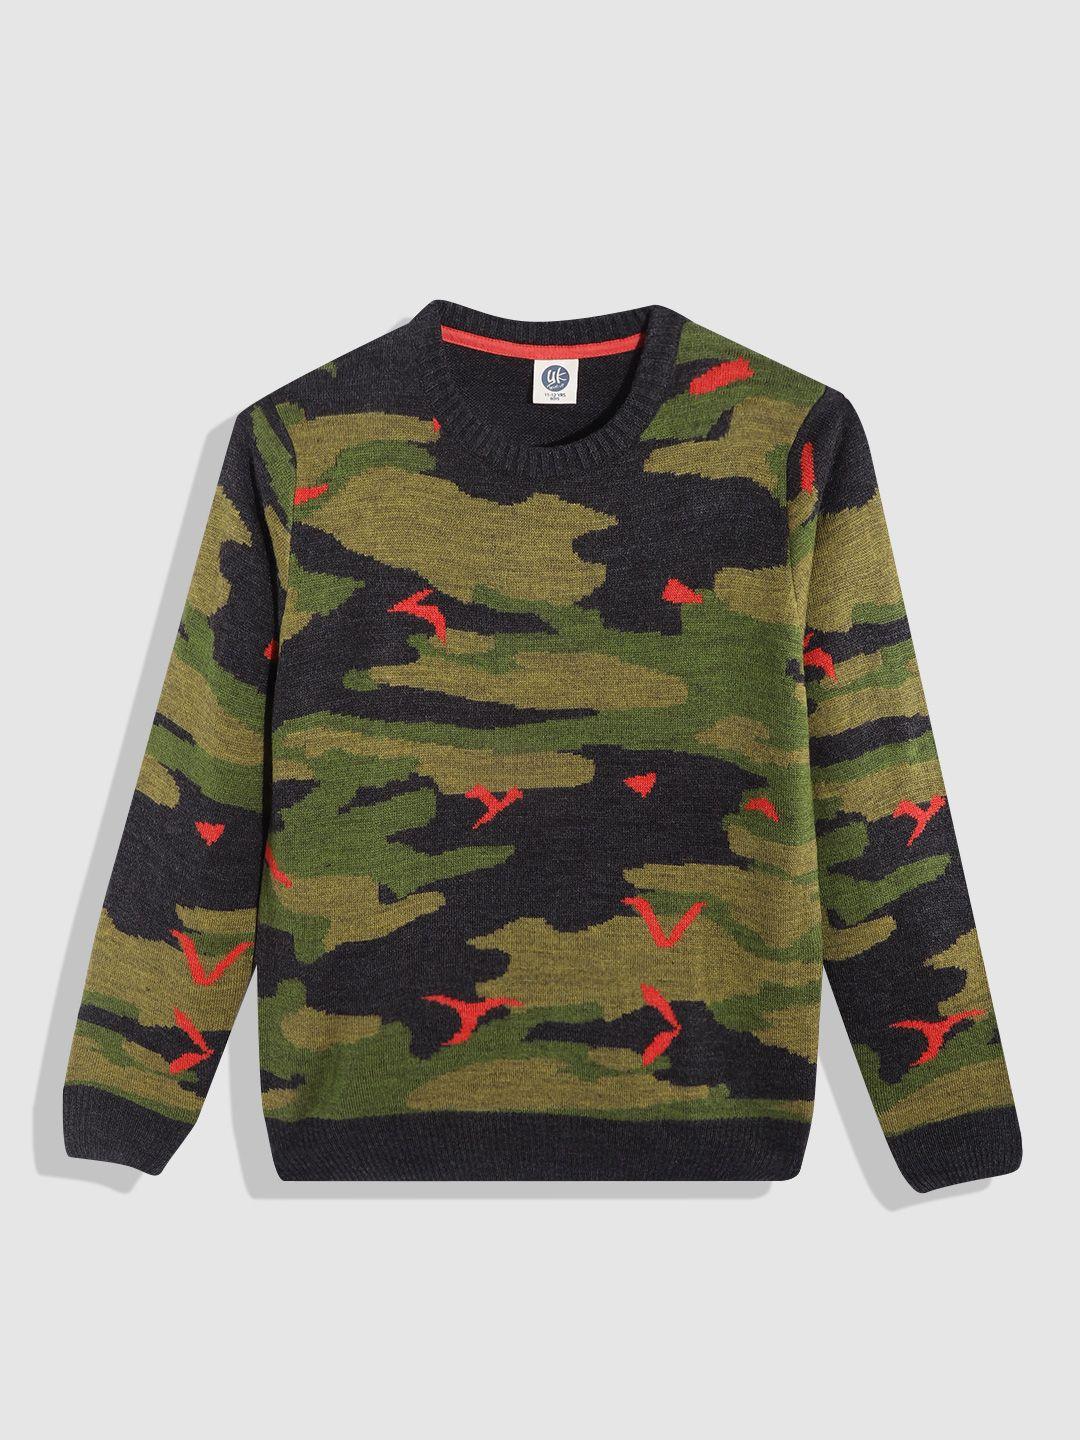 yk boys green & black camouflage printed pullover